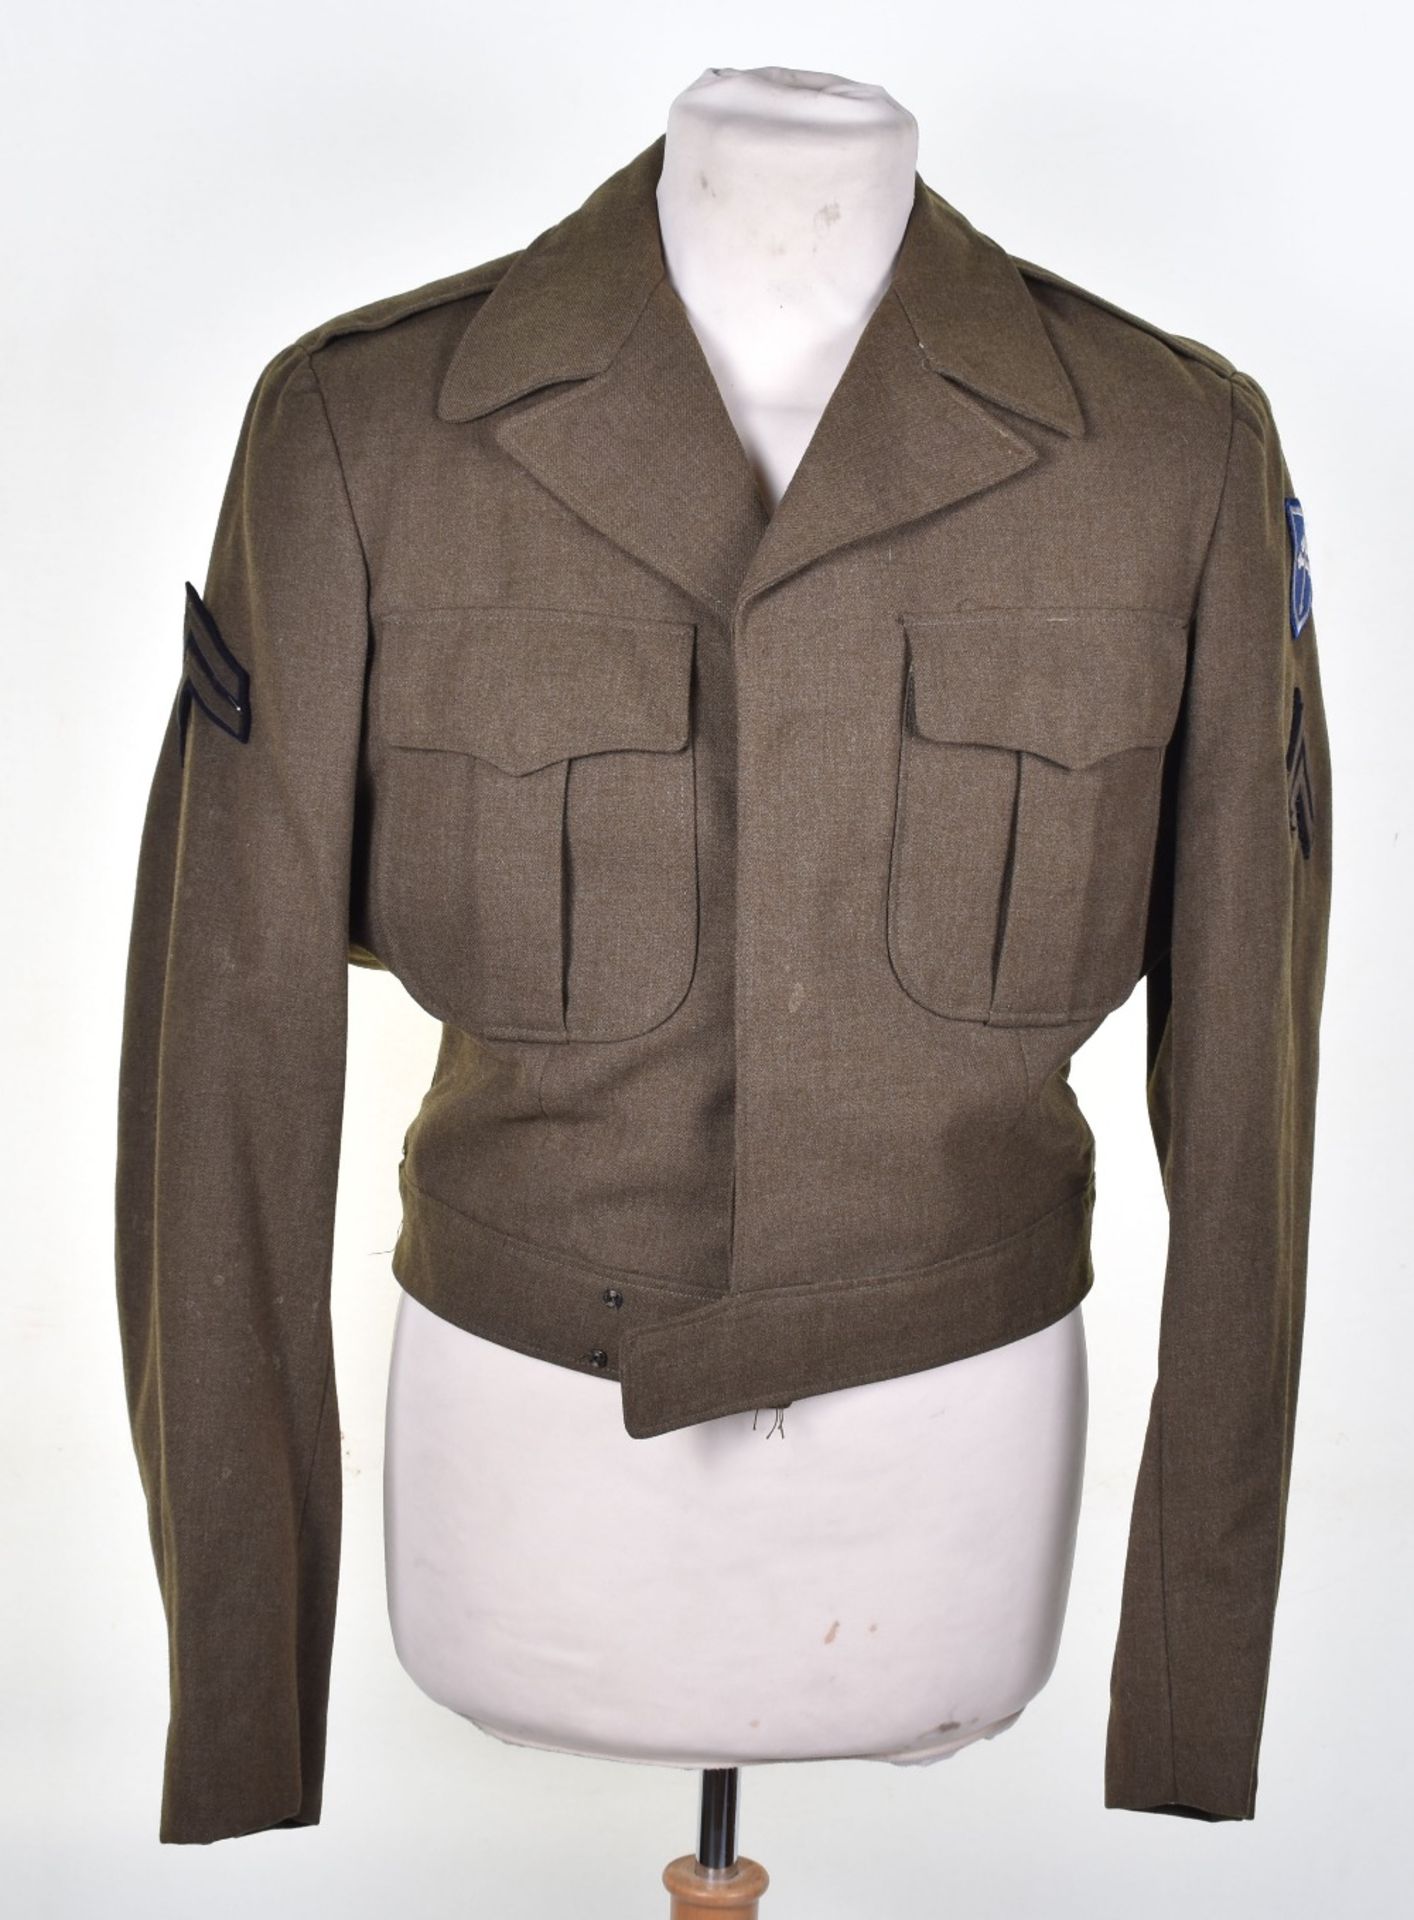 WW2 American Military Ike Jacket and Trousers - Image 2 of 12